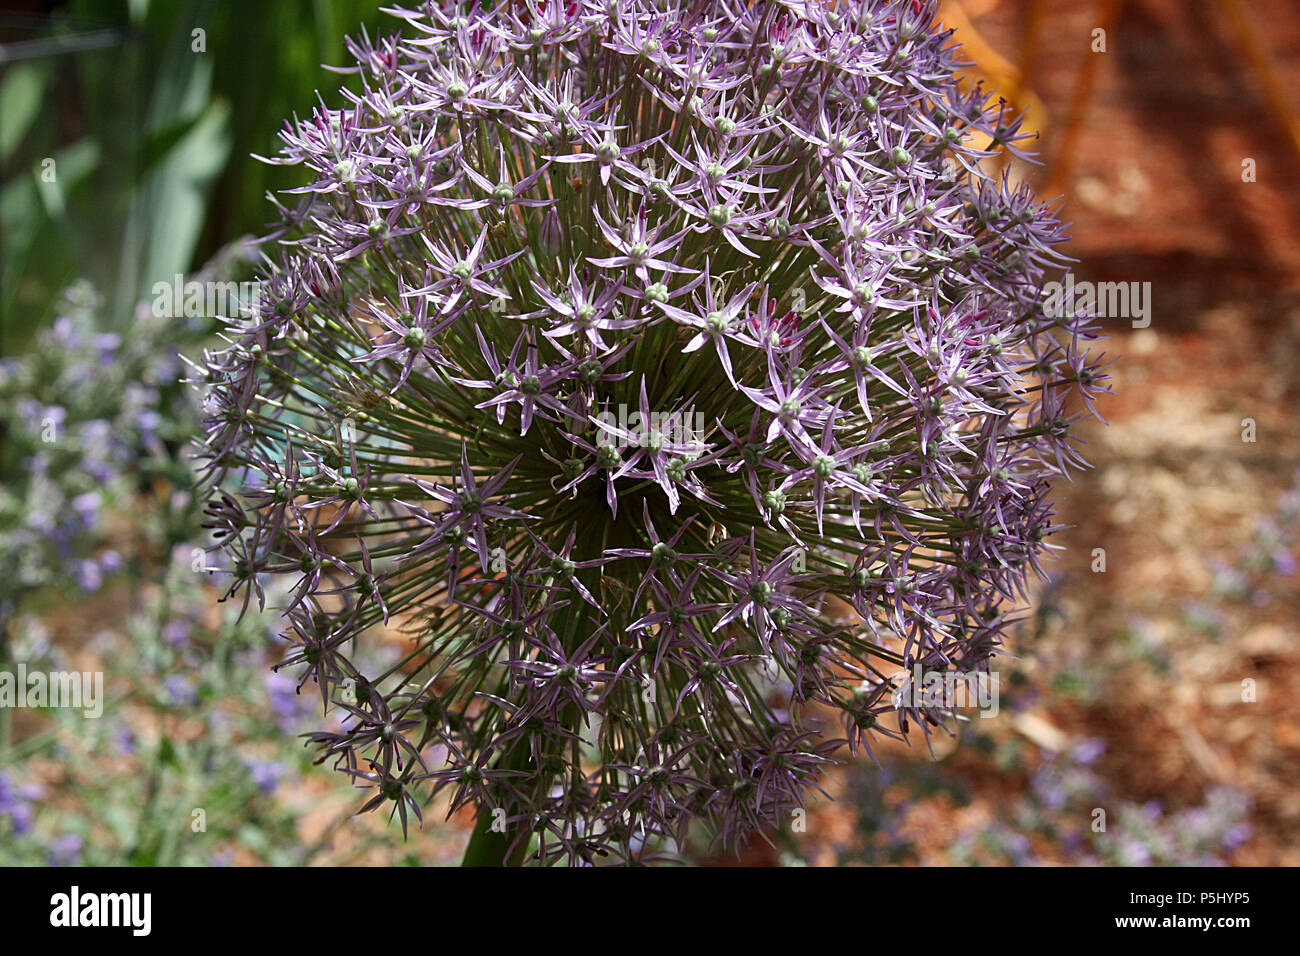 Close up of umbel of onion's flowers Stock Photo